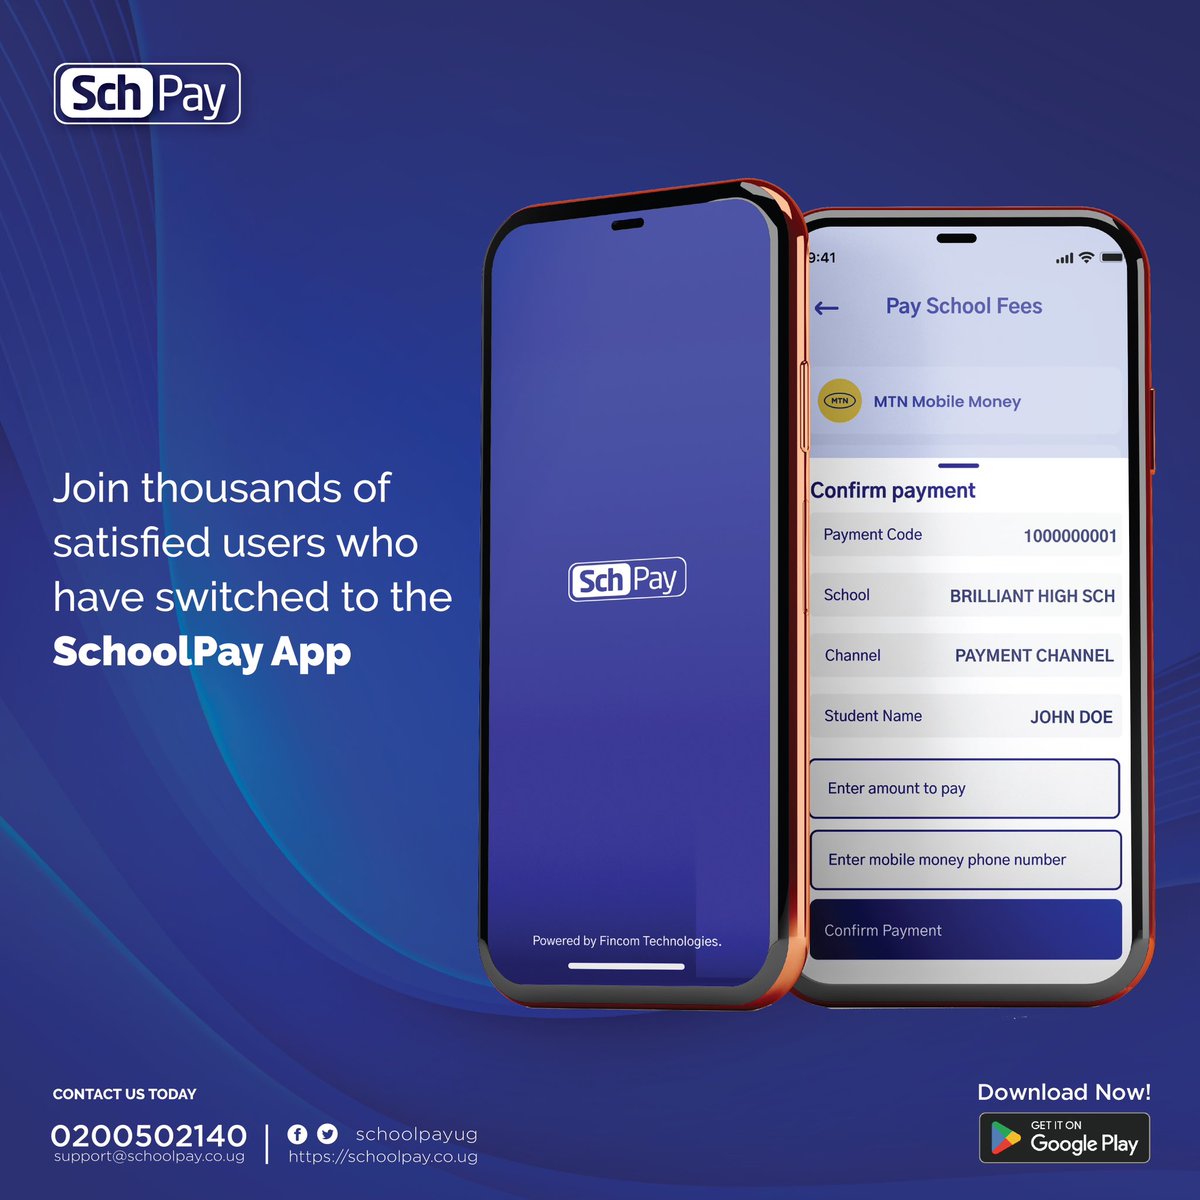 Have convenience at your fingertips with the SchoolPay App. 
Make school fees payments, Download your payment receipt  and pay for any other school Activities using the app.
#DownloadNow 
#SchoolPayApp.